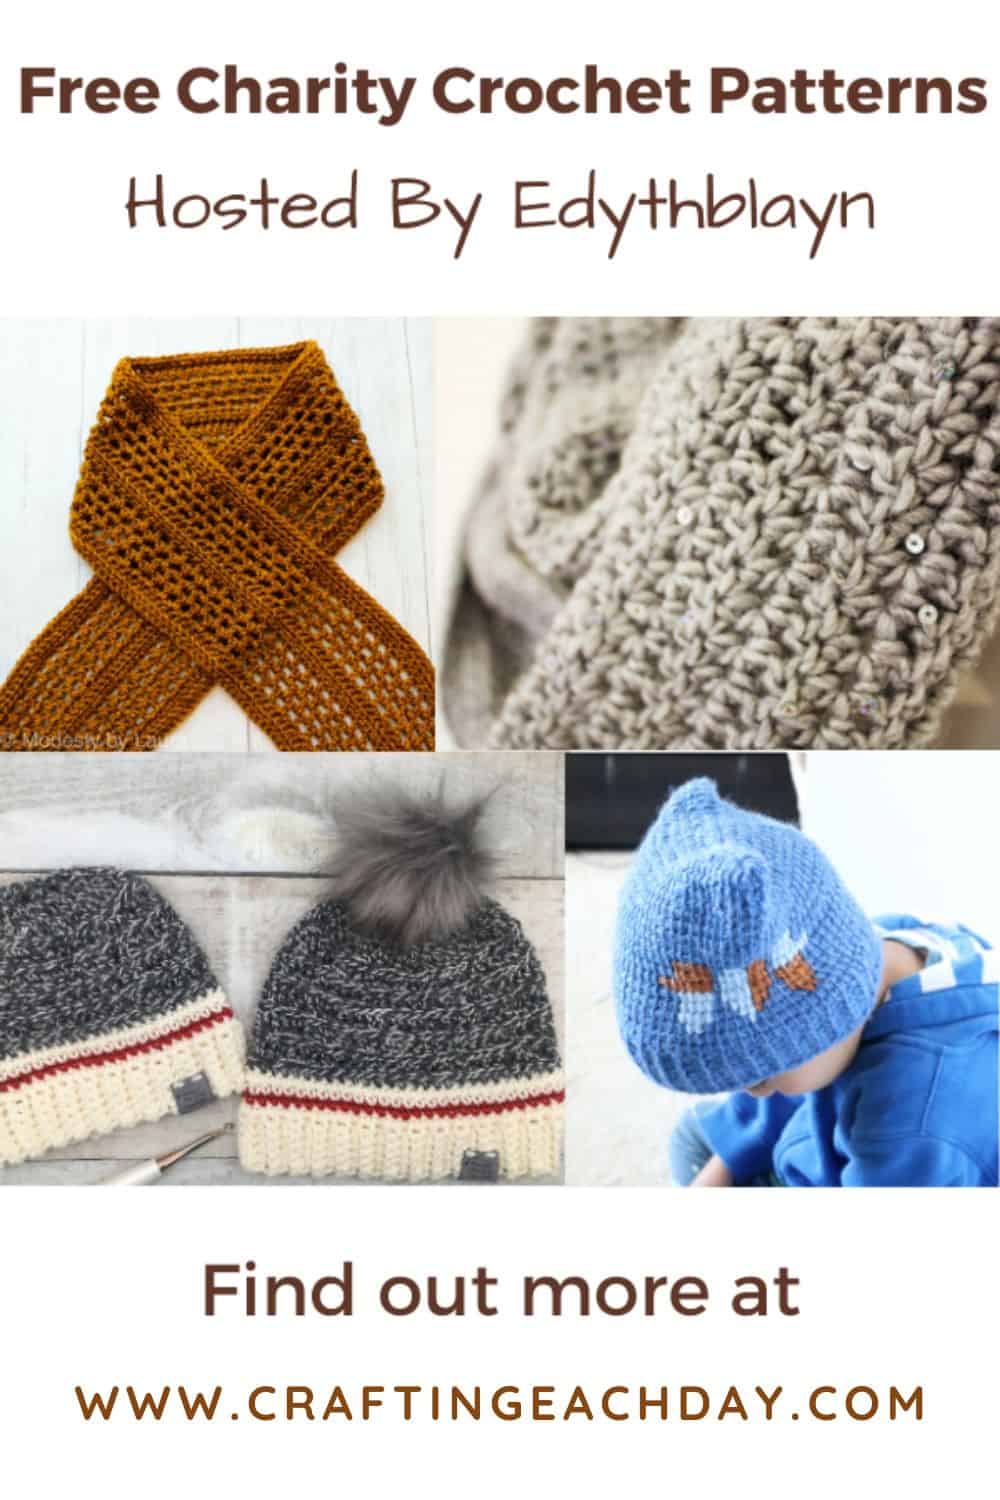 Crochet Hat and Scarf Patterns for Charity Crafting Each Day